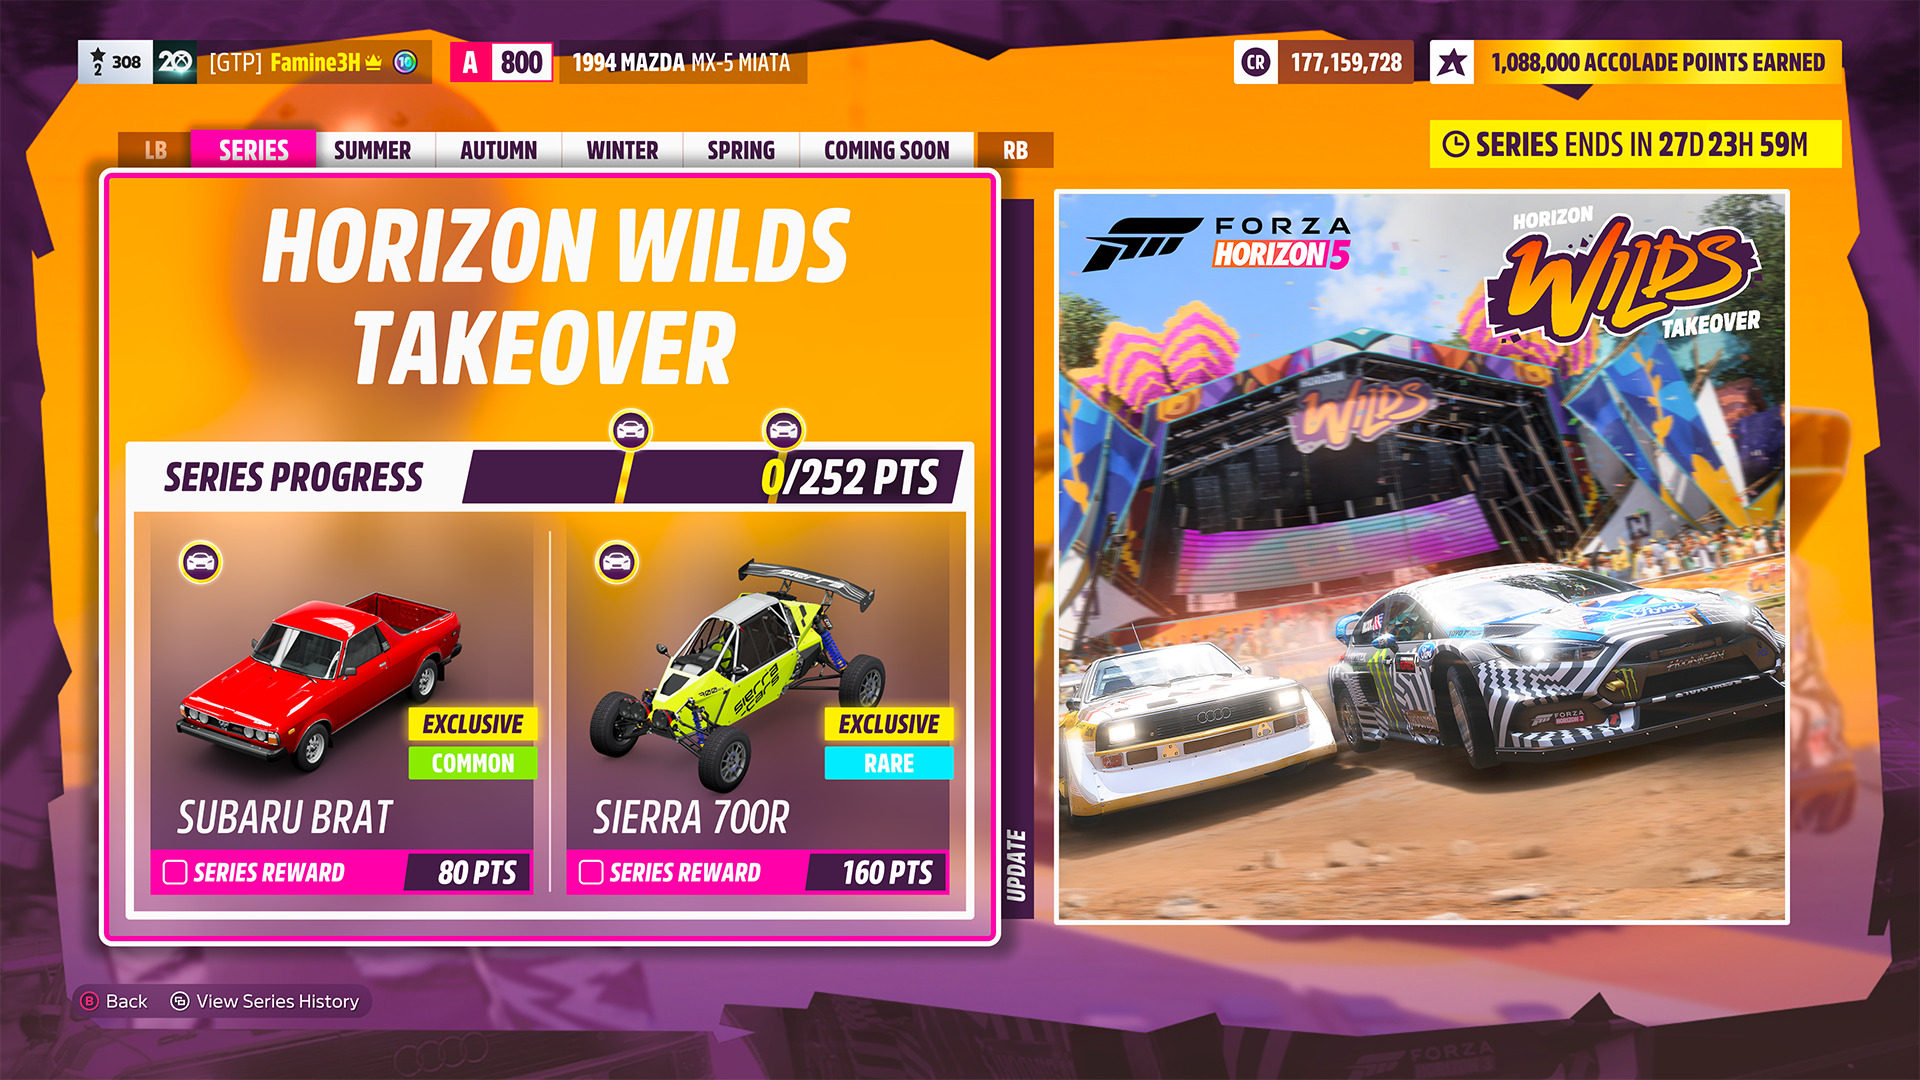 forza horizon 1 pc system requirements/game hub youtub channel 